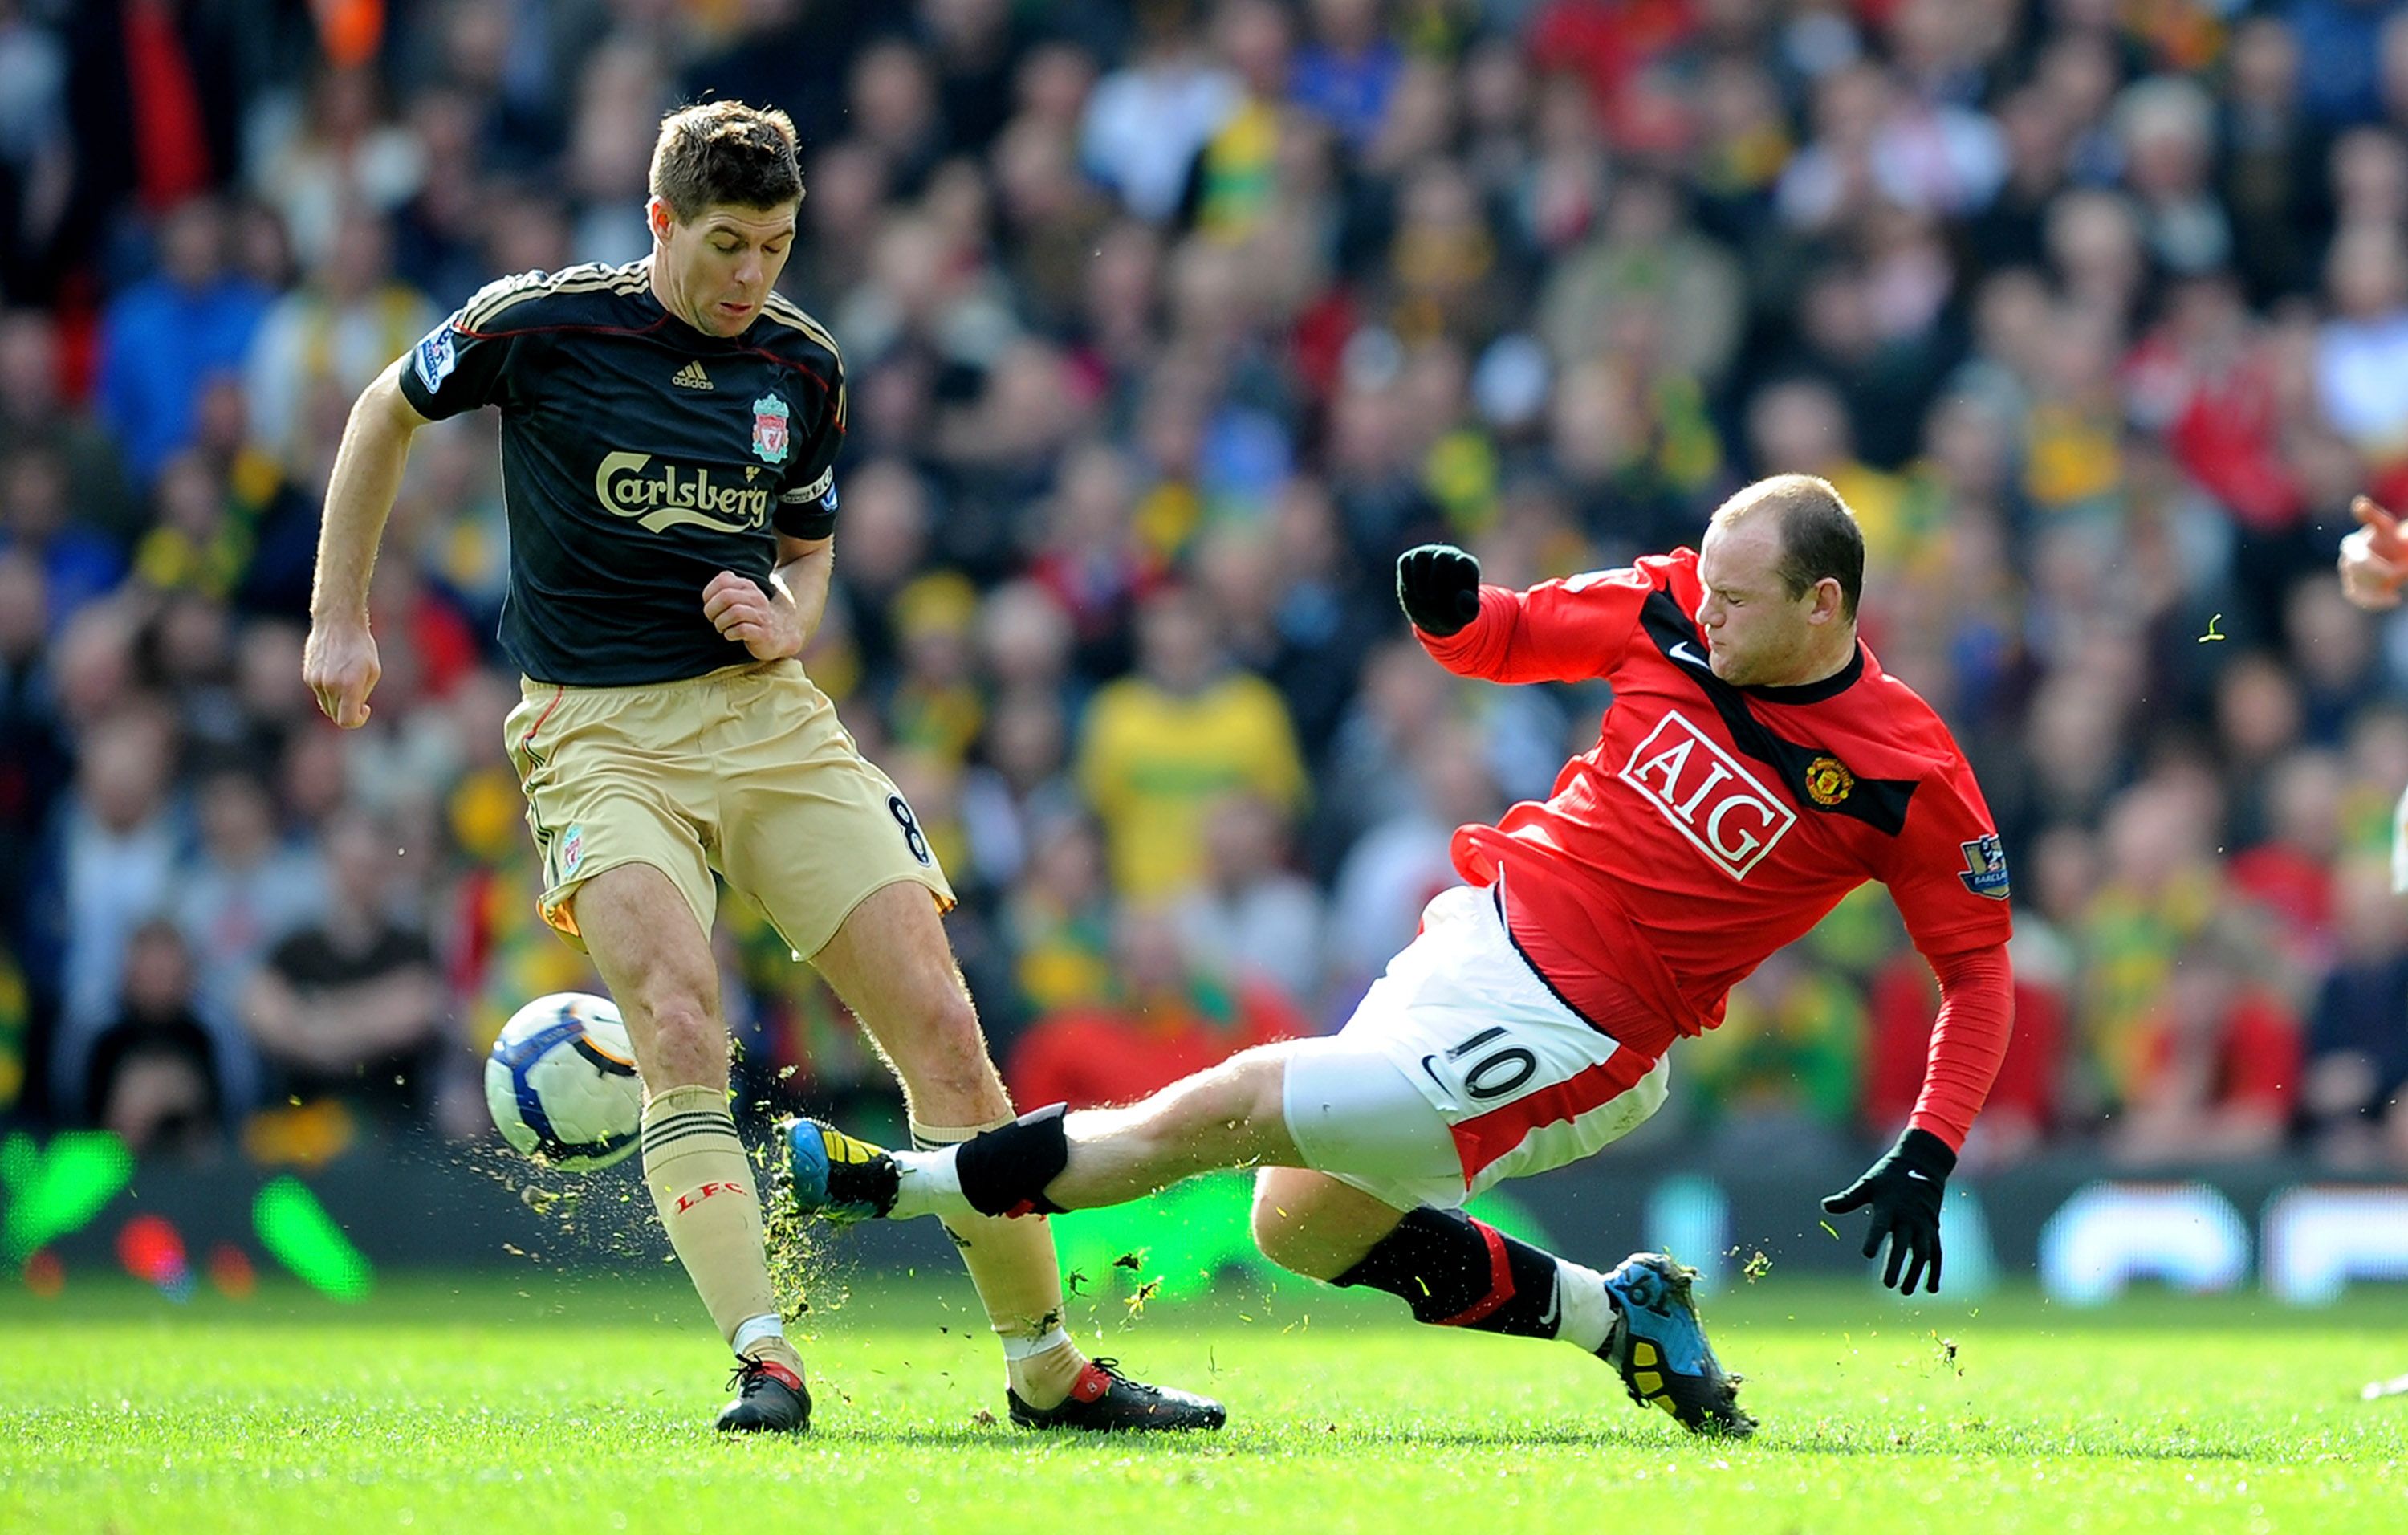 MANCHESTER, ENGLAND - MARCH 21: Steven Gerrard of Liverpool is tackled by Wayne Rooney of Manchester United during the Barclays Premier League match between Manchester United and Liverpool at Old Trafford on March 21, 2010 in Manchester, England. (Photo by Michael Regan/Getty Images)